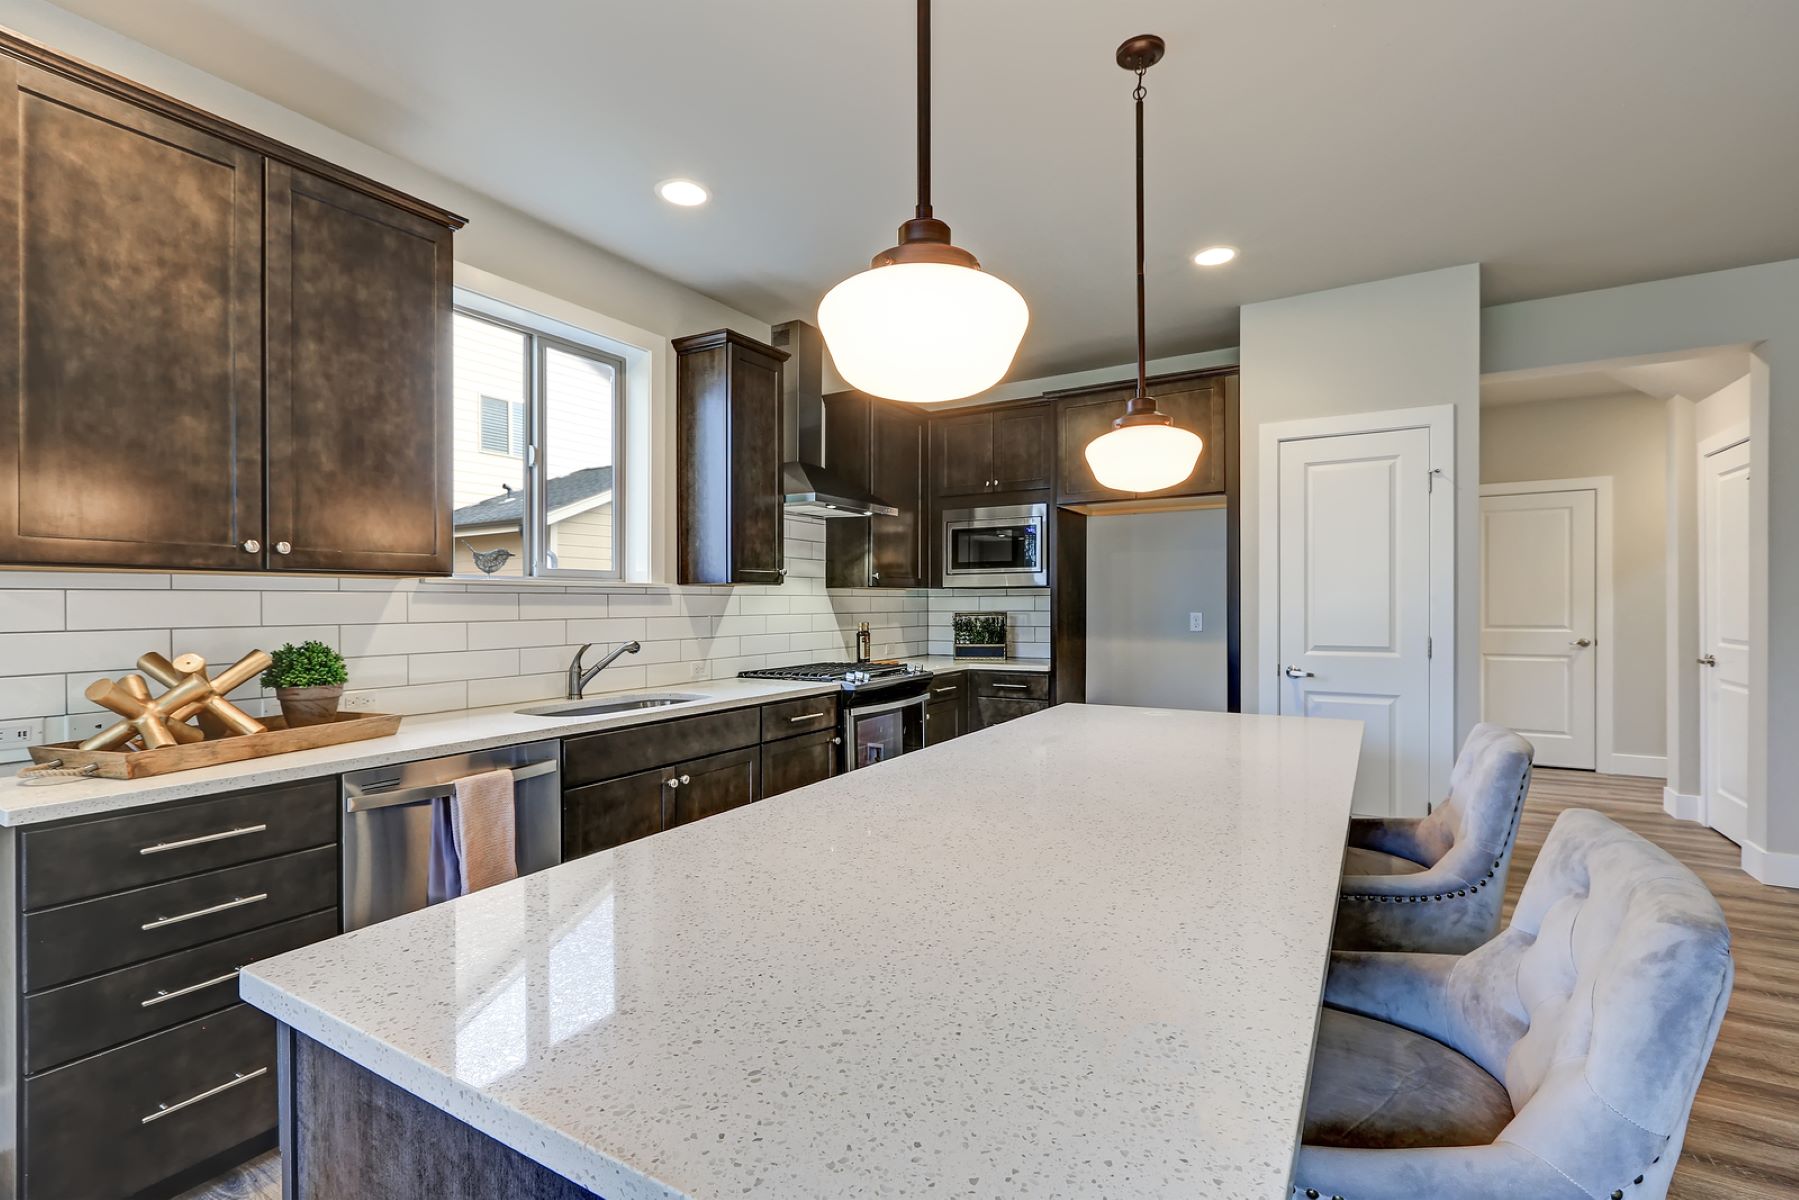 What Are The Disadvantages Of Quartz Countertops